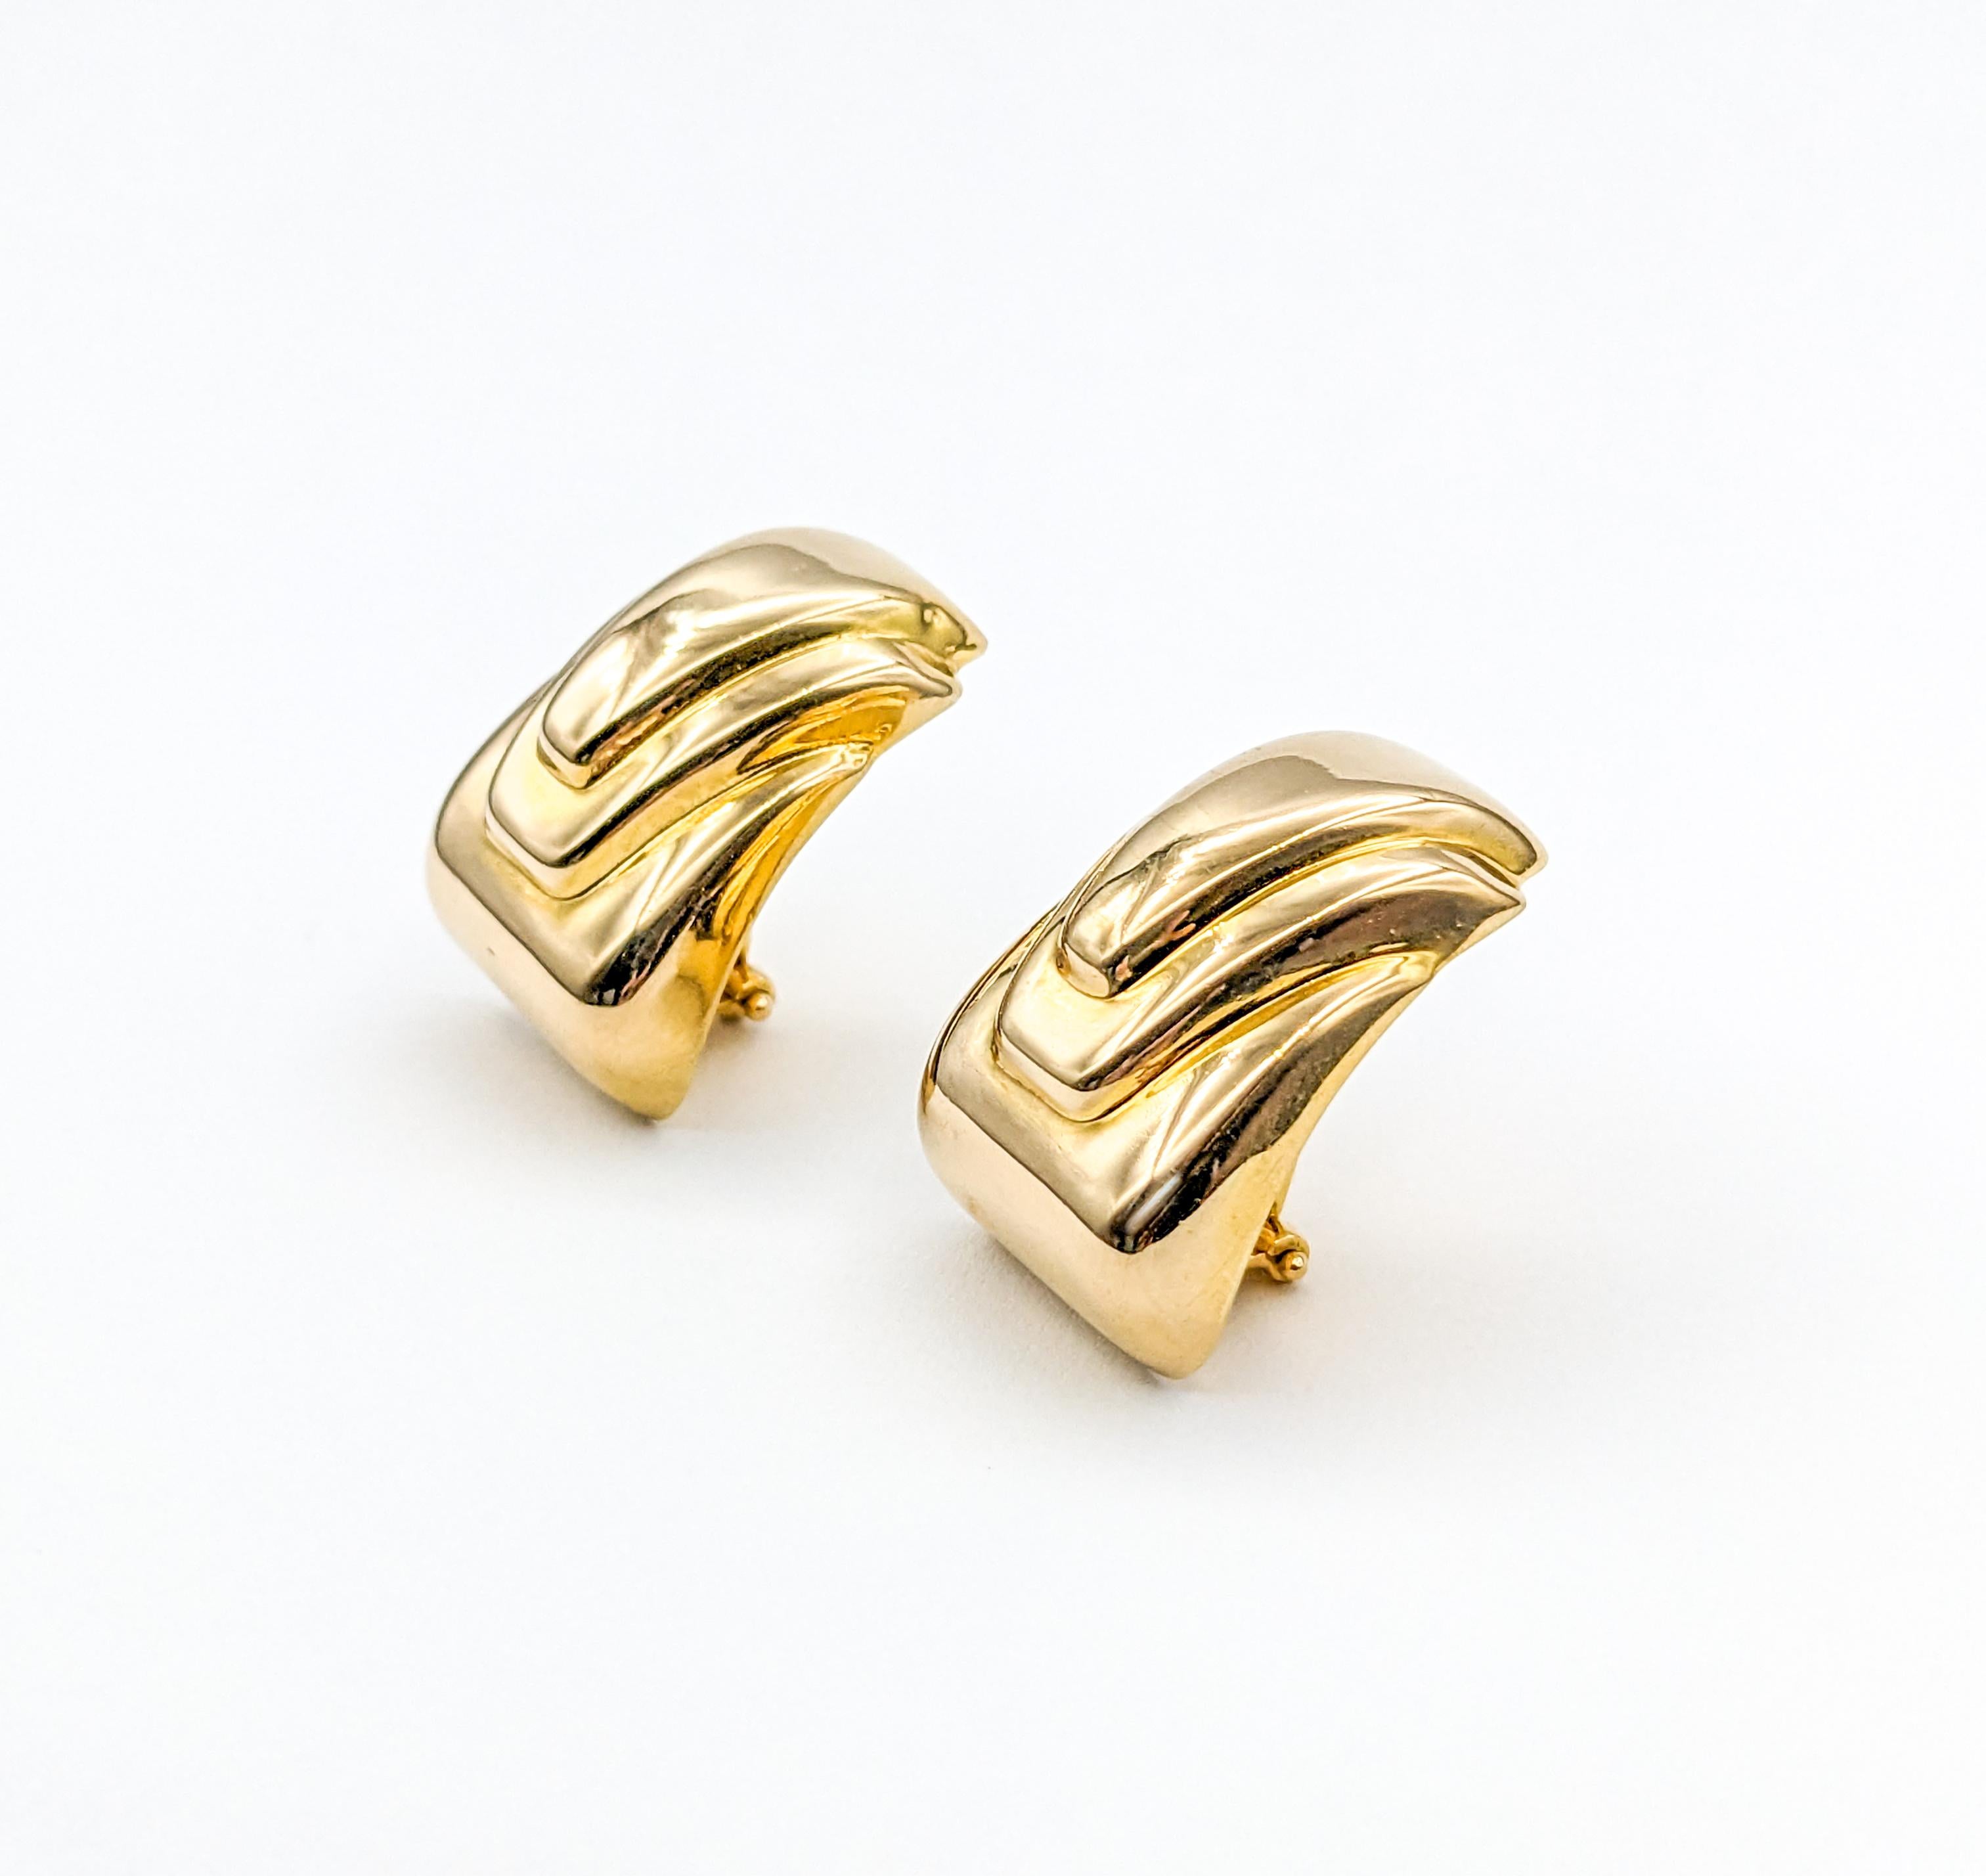 Opulent Step Design Clip On Earrings

Elevate your style with our distinctive clip-on earrings, artfully designed for the modern connoisseur. Set in radiant 14k yellow gold, these earrings present a unique stepped design, adding depth and